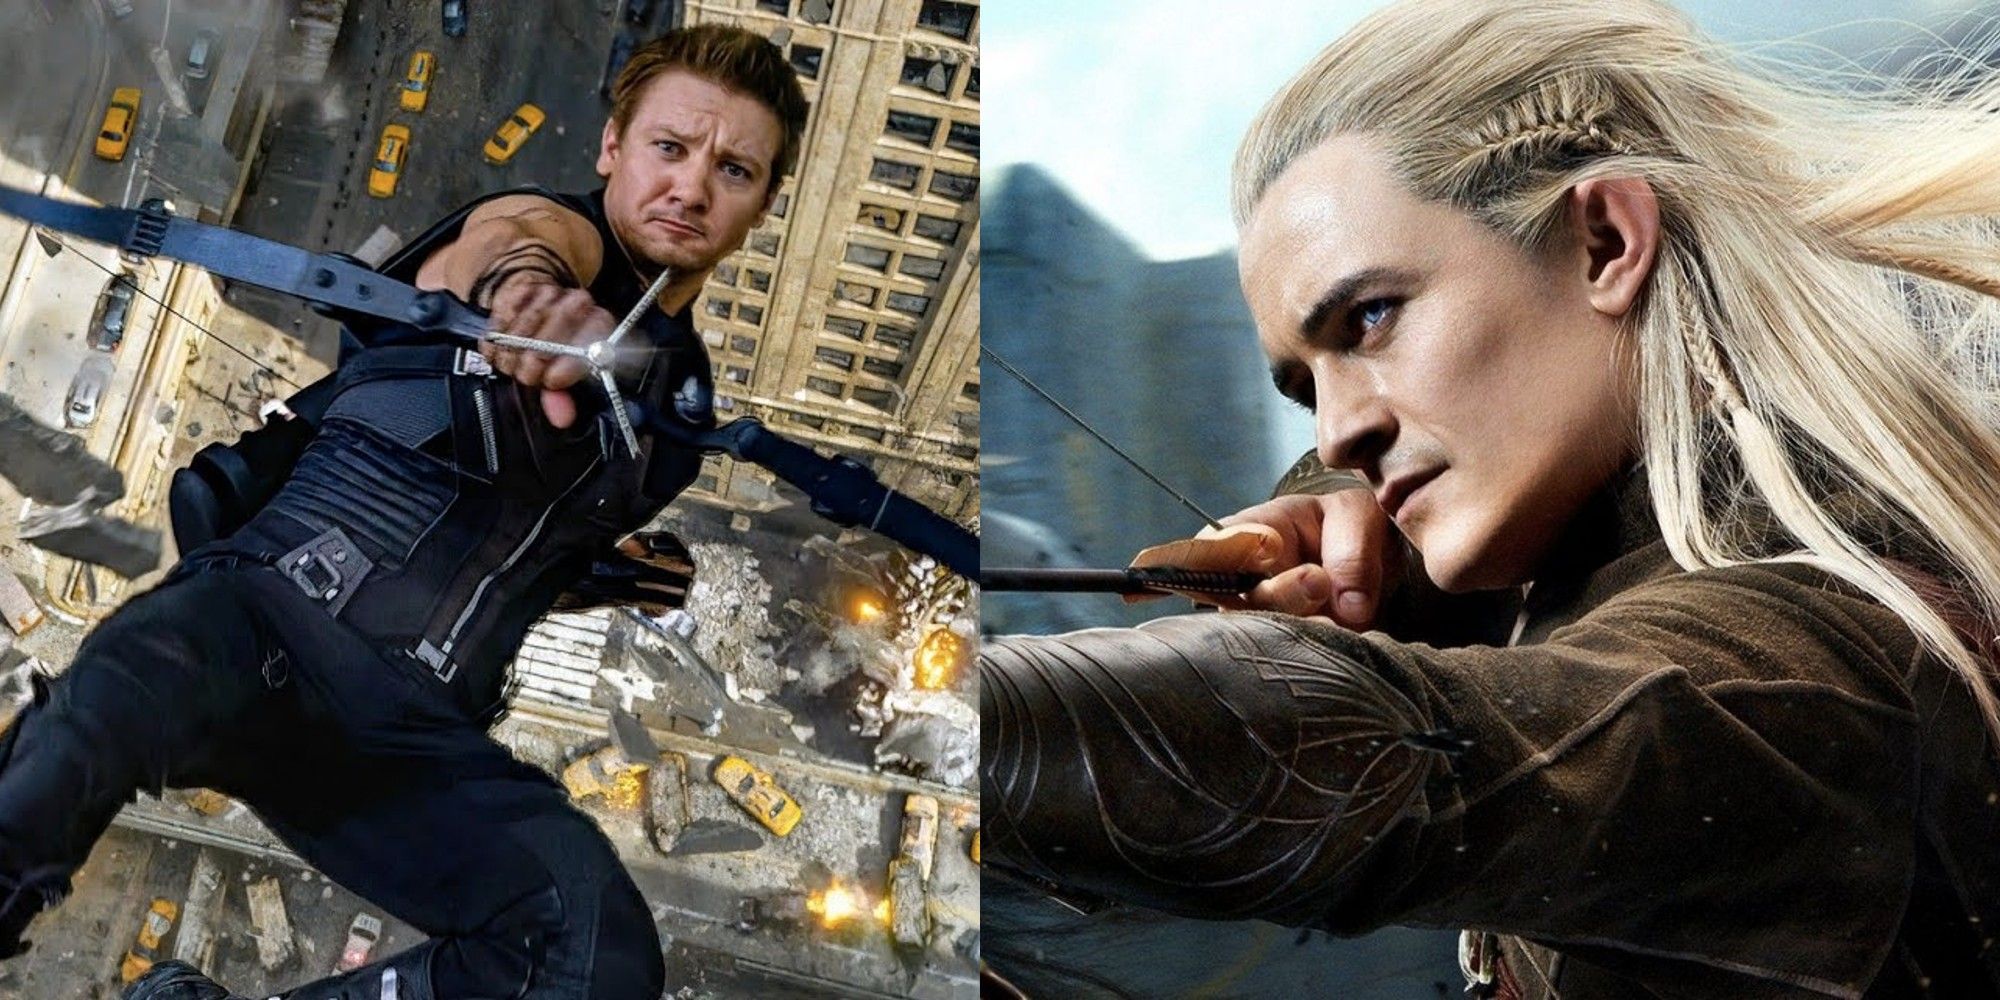 Left to right: Clint Barton in Avengers and Legolas in Lord of the Rings